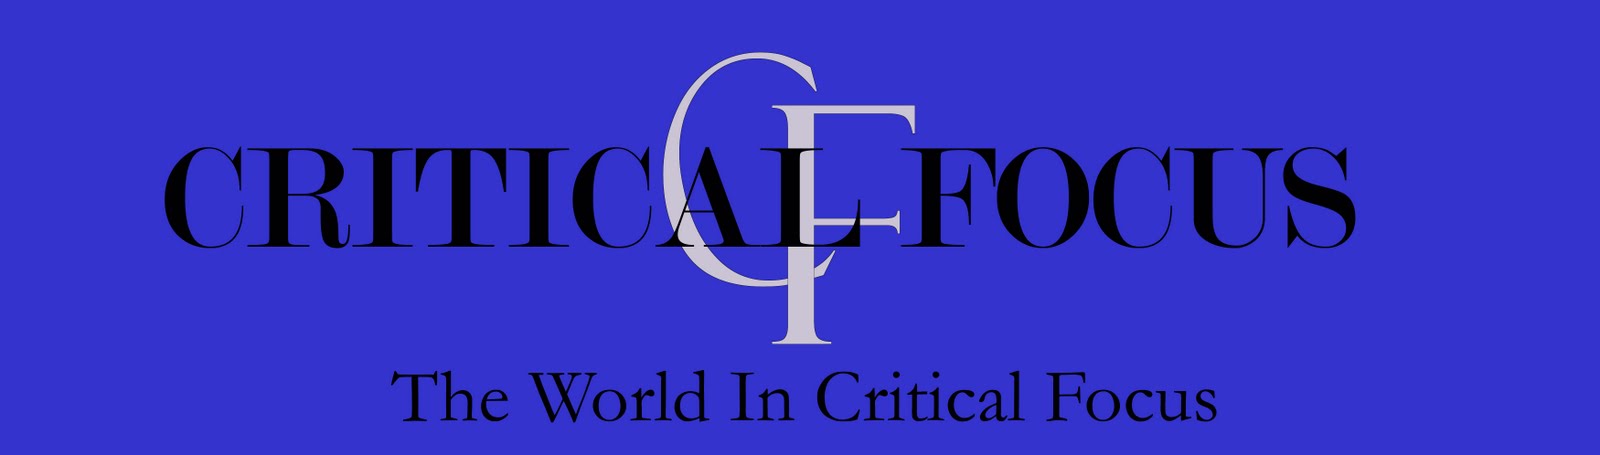 The World In Critical Focus